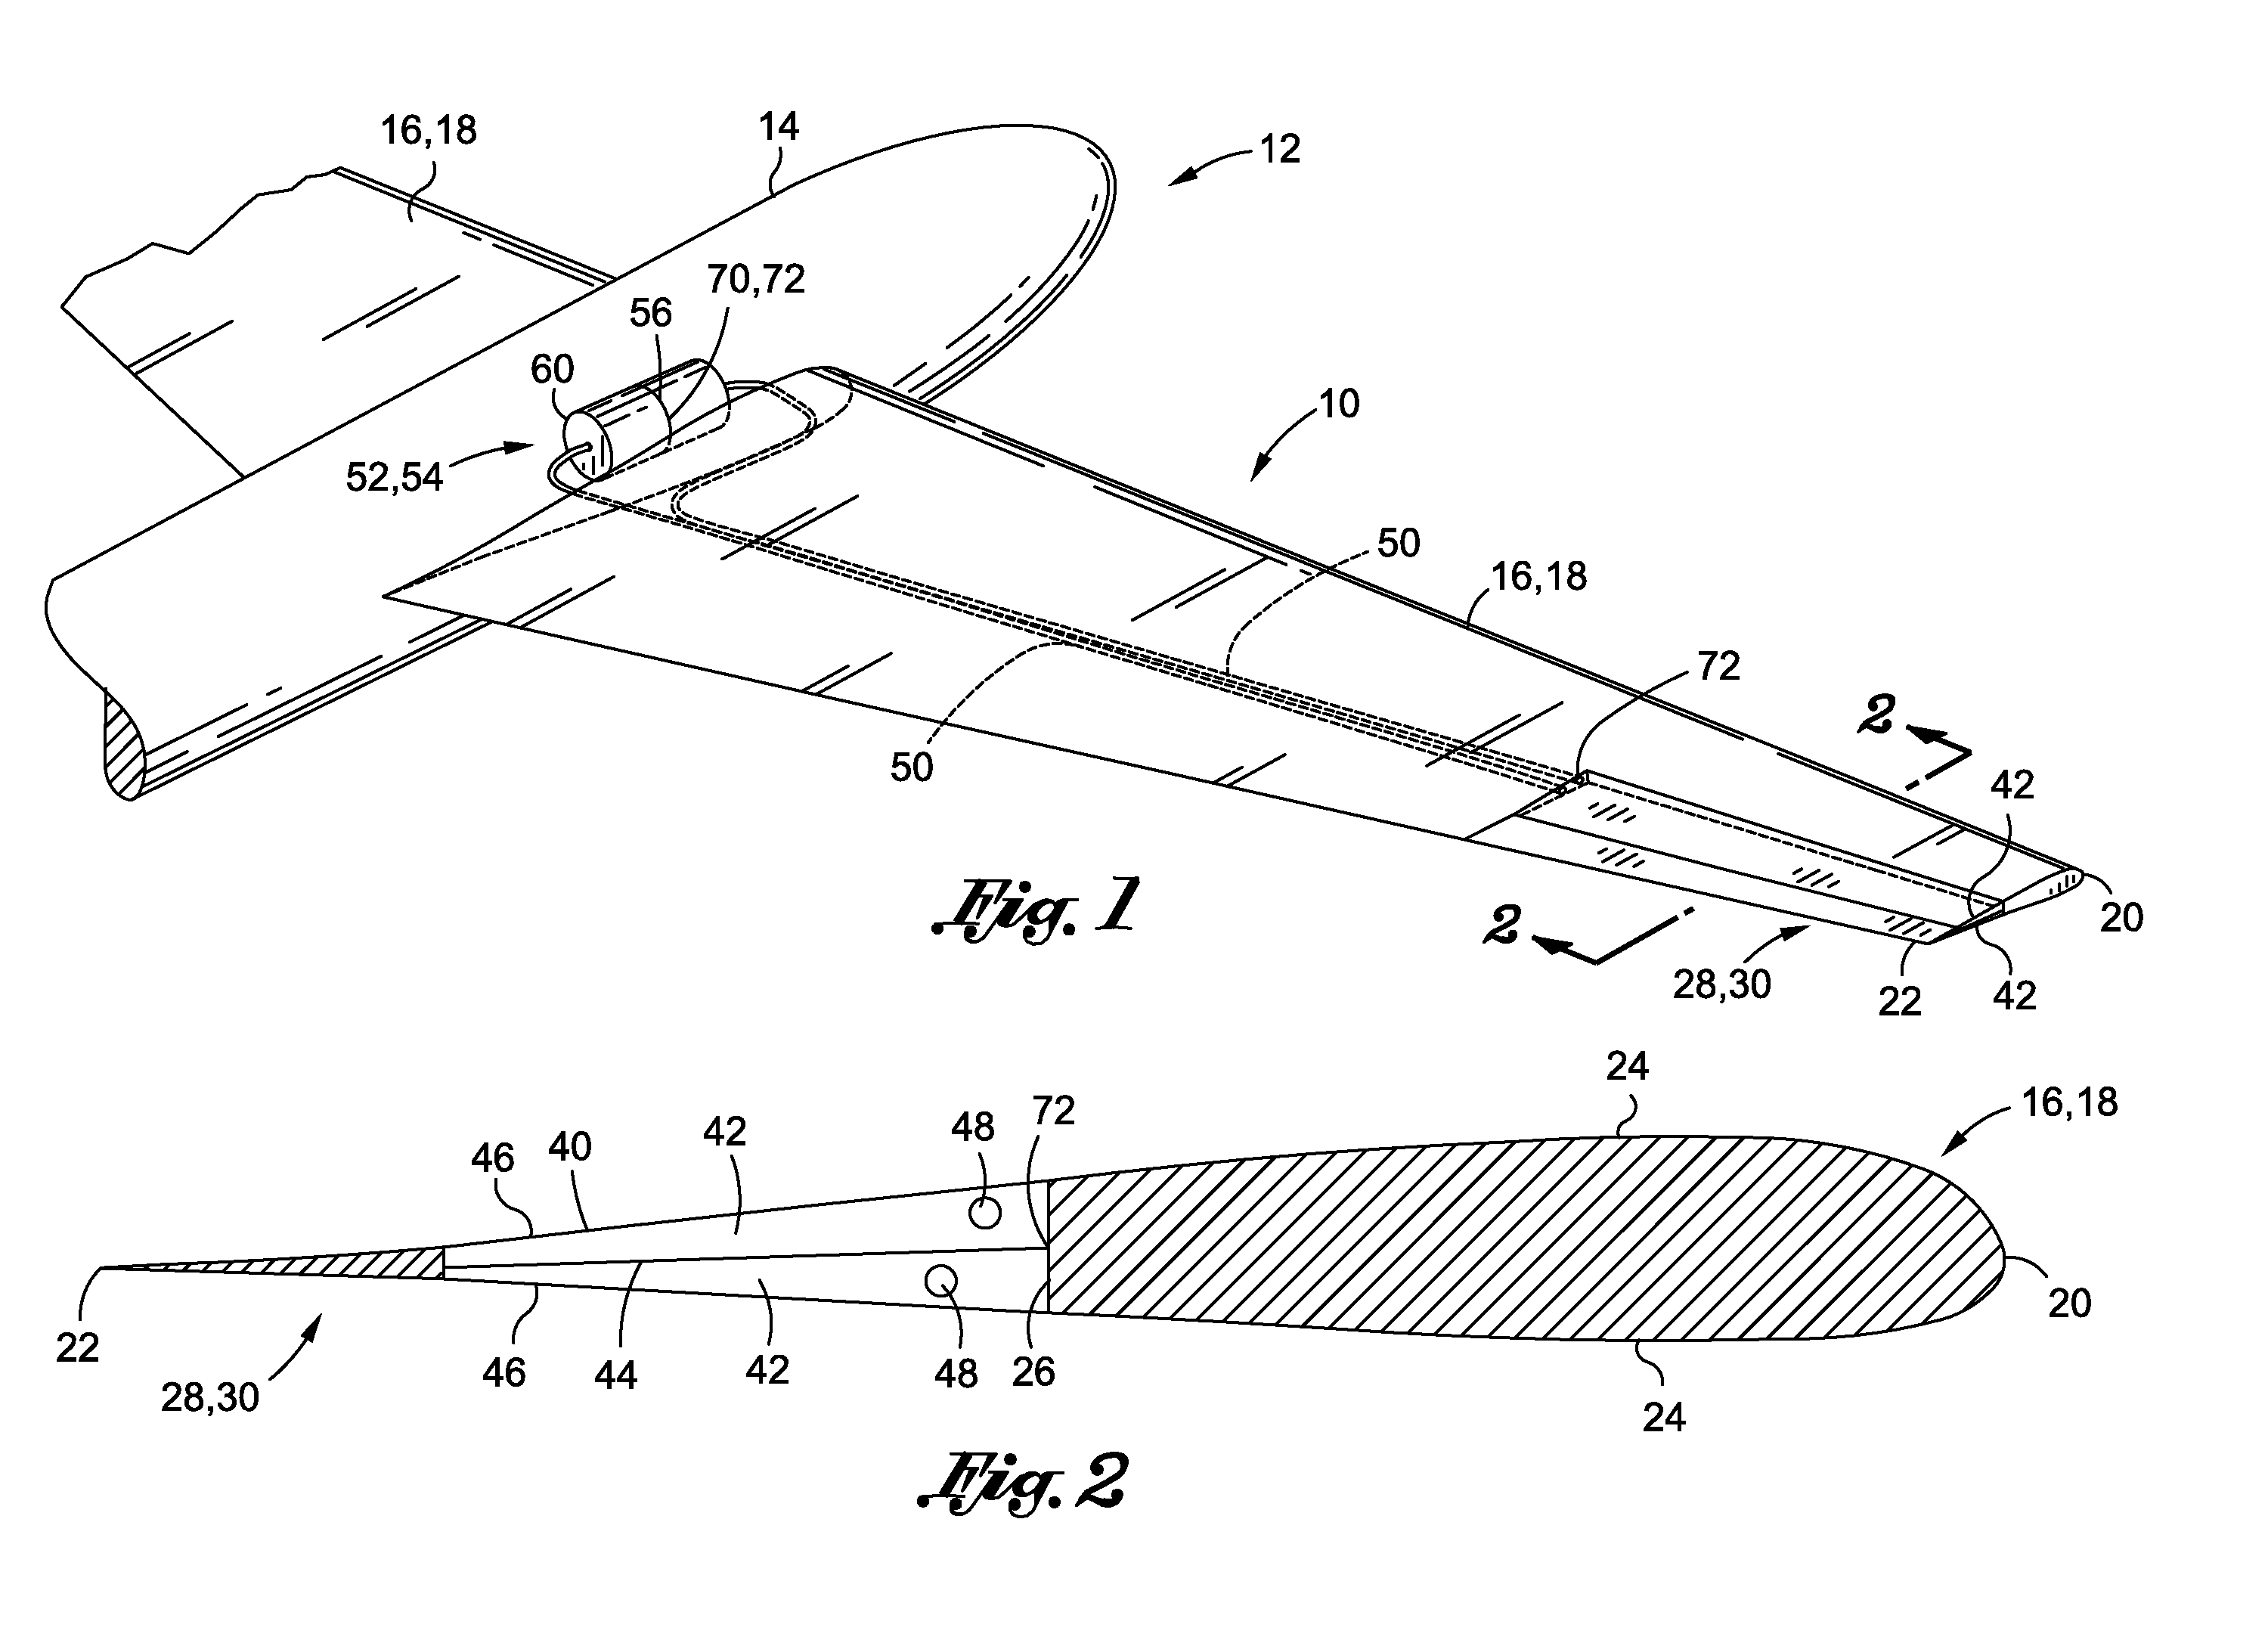 Pneumatic control system for aerodynamic surfaces